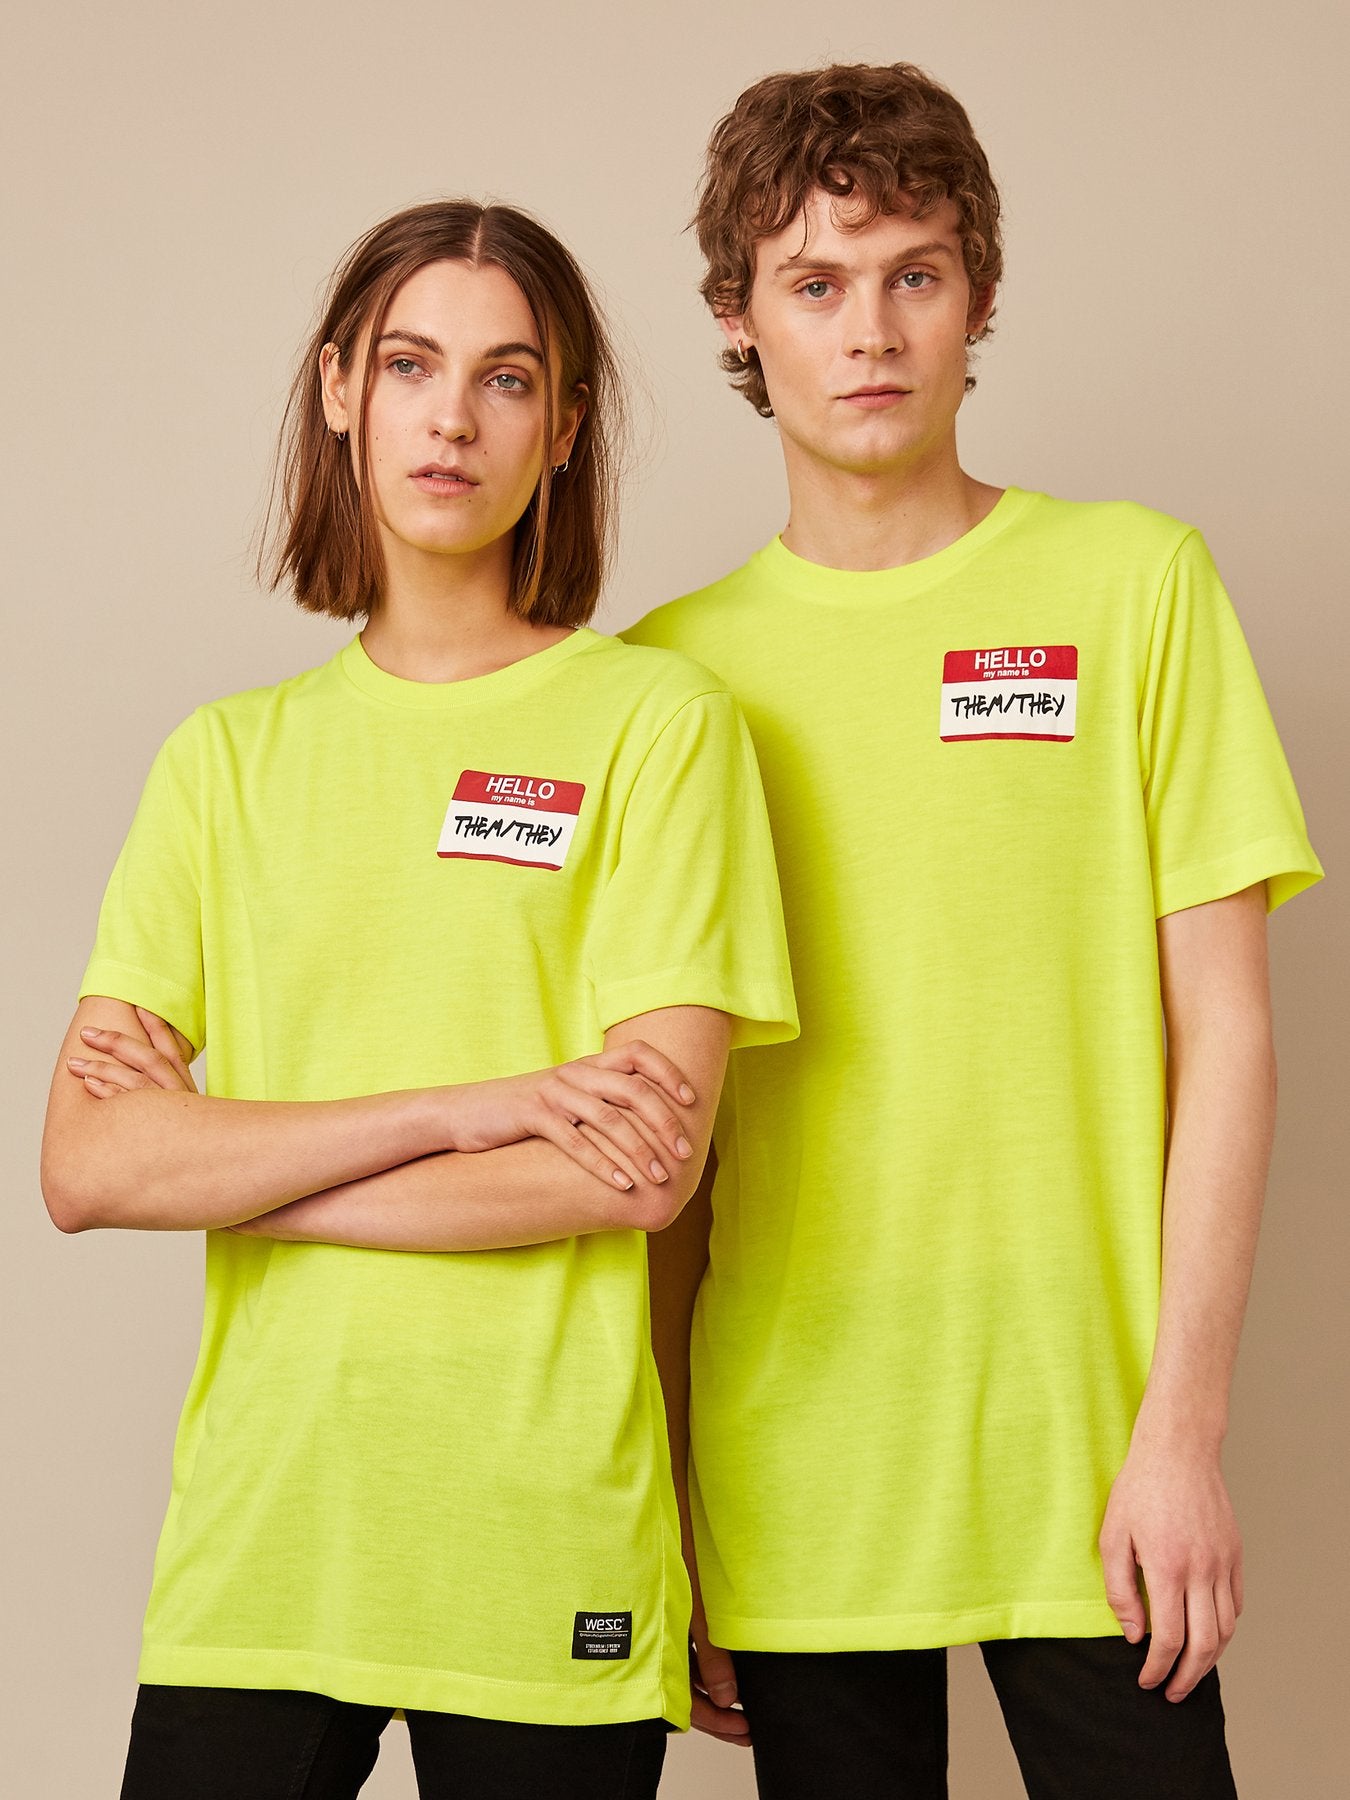 WeSC - Max Them/They T-Shirt - Safety Yellow